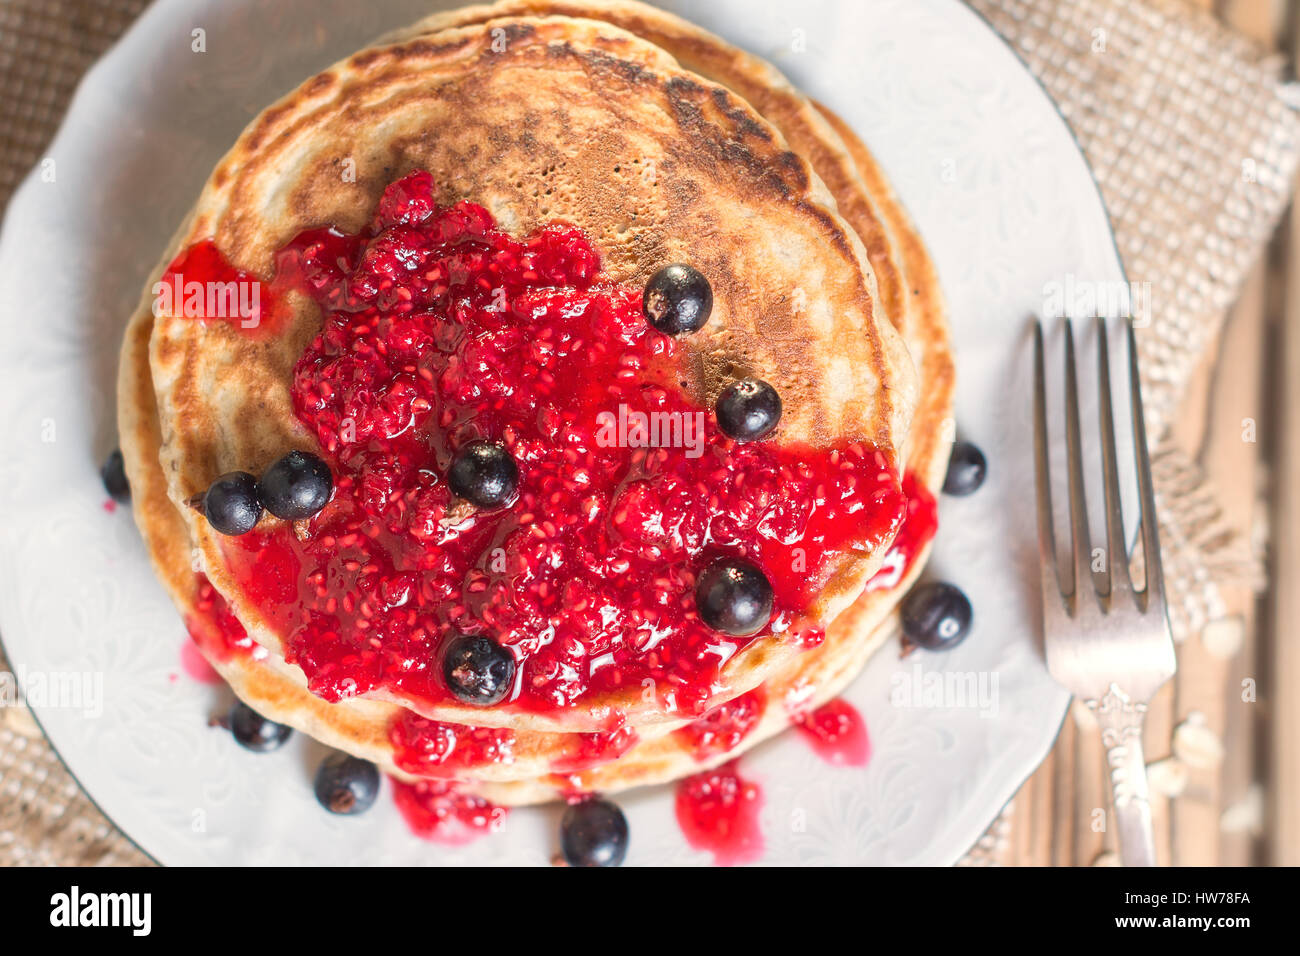 Delicious Oatmeal Pancake with raspberry jam and decorated with black currant. Top view, flat lay. Shallow DOF Stock Photo